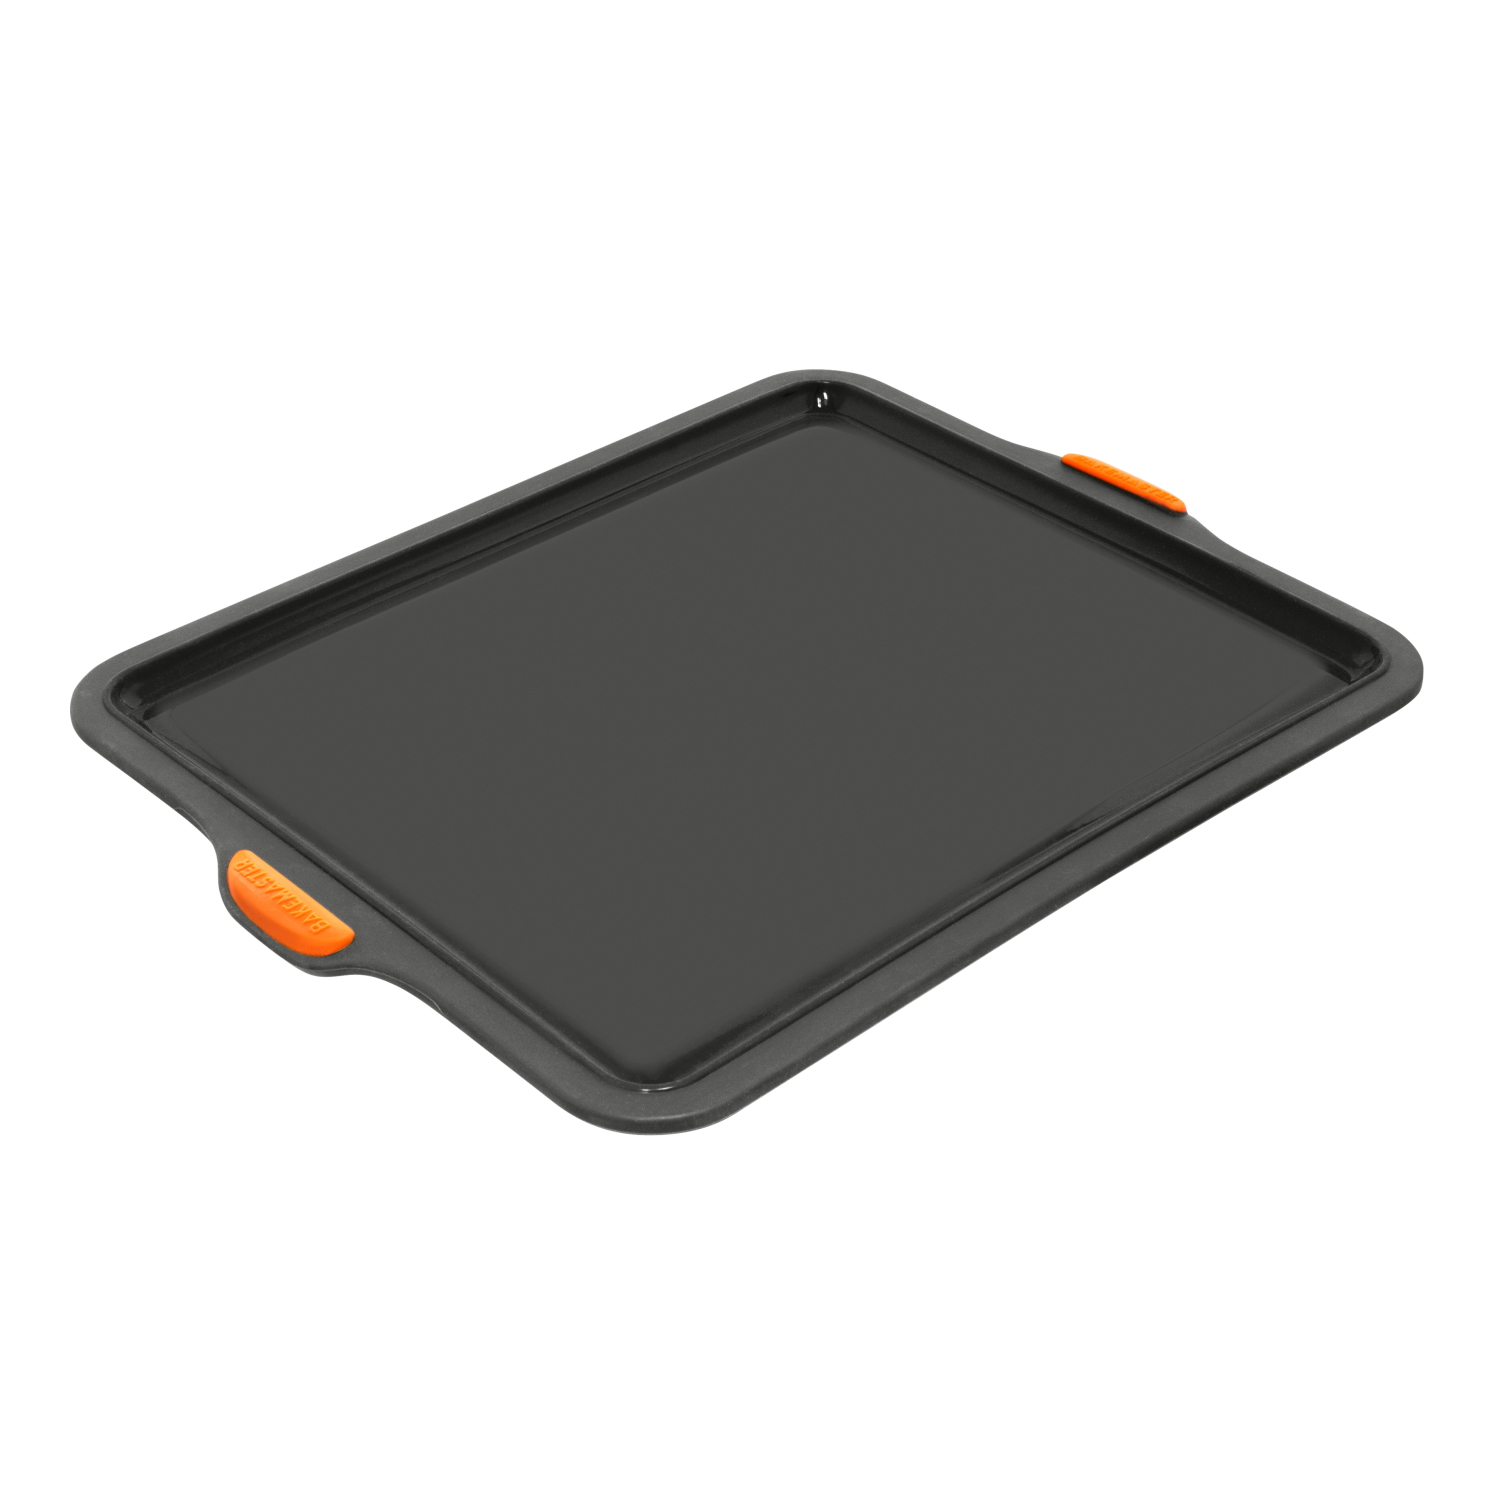 Bakemaster Reinforced Silicone Baking Tray 31x25cm